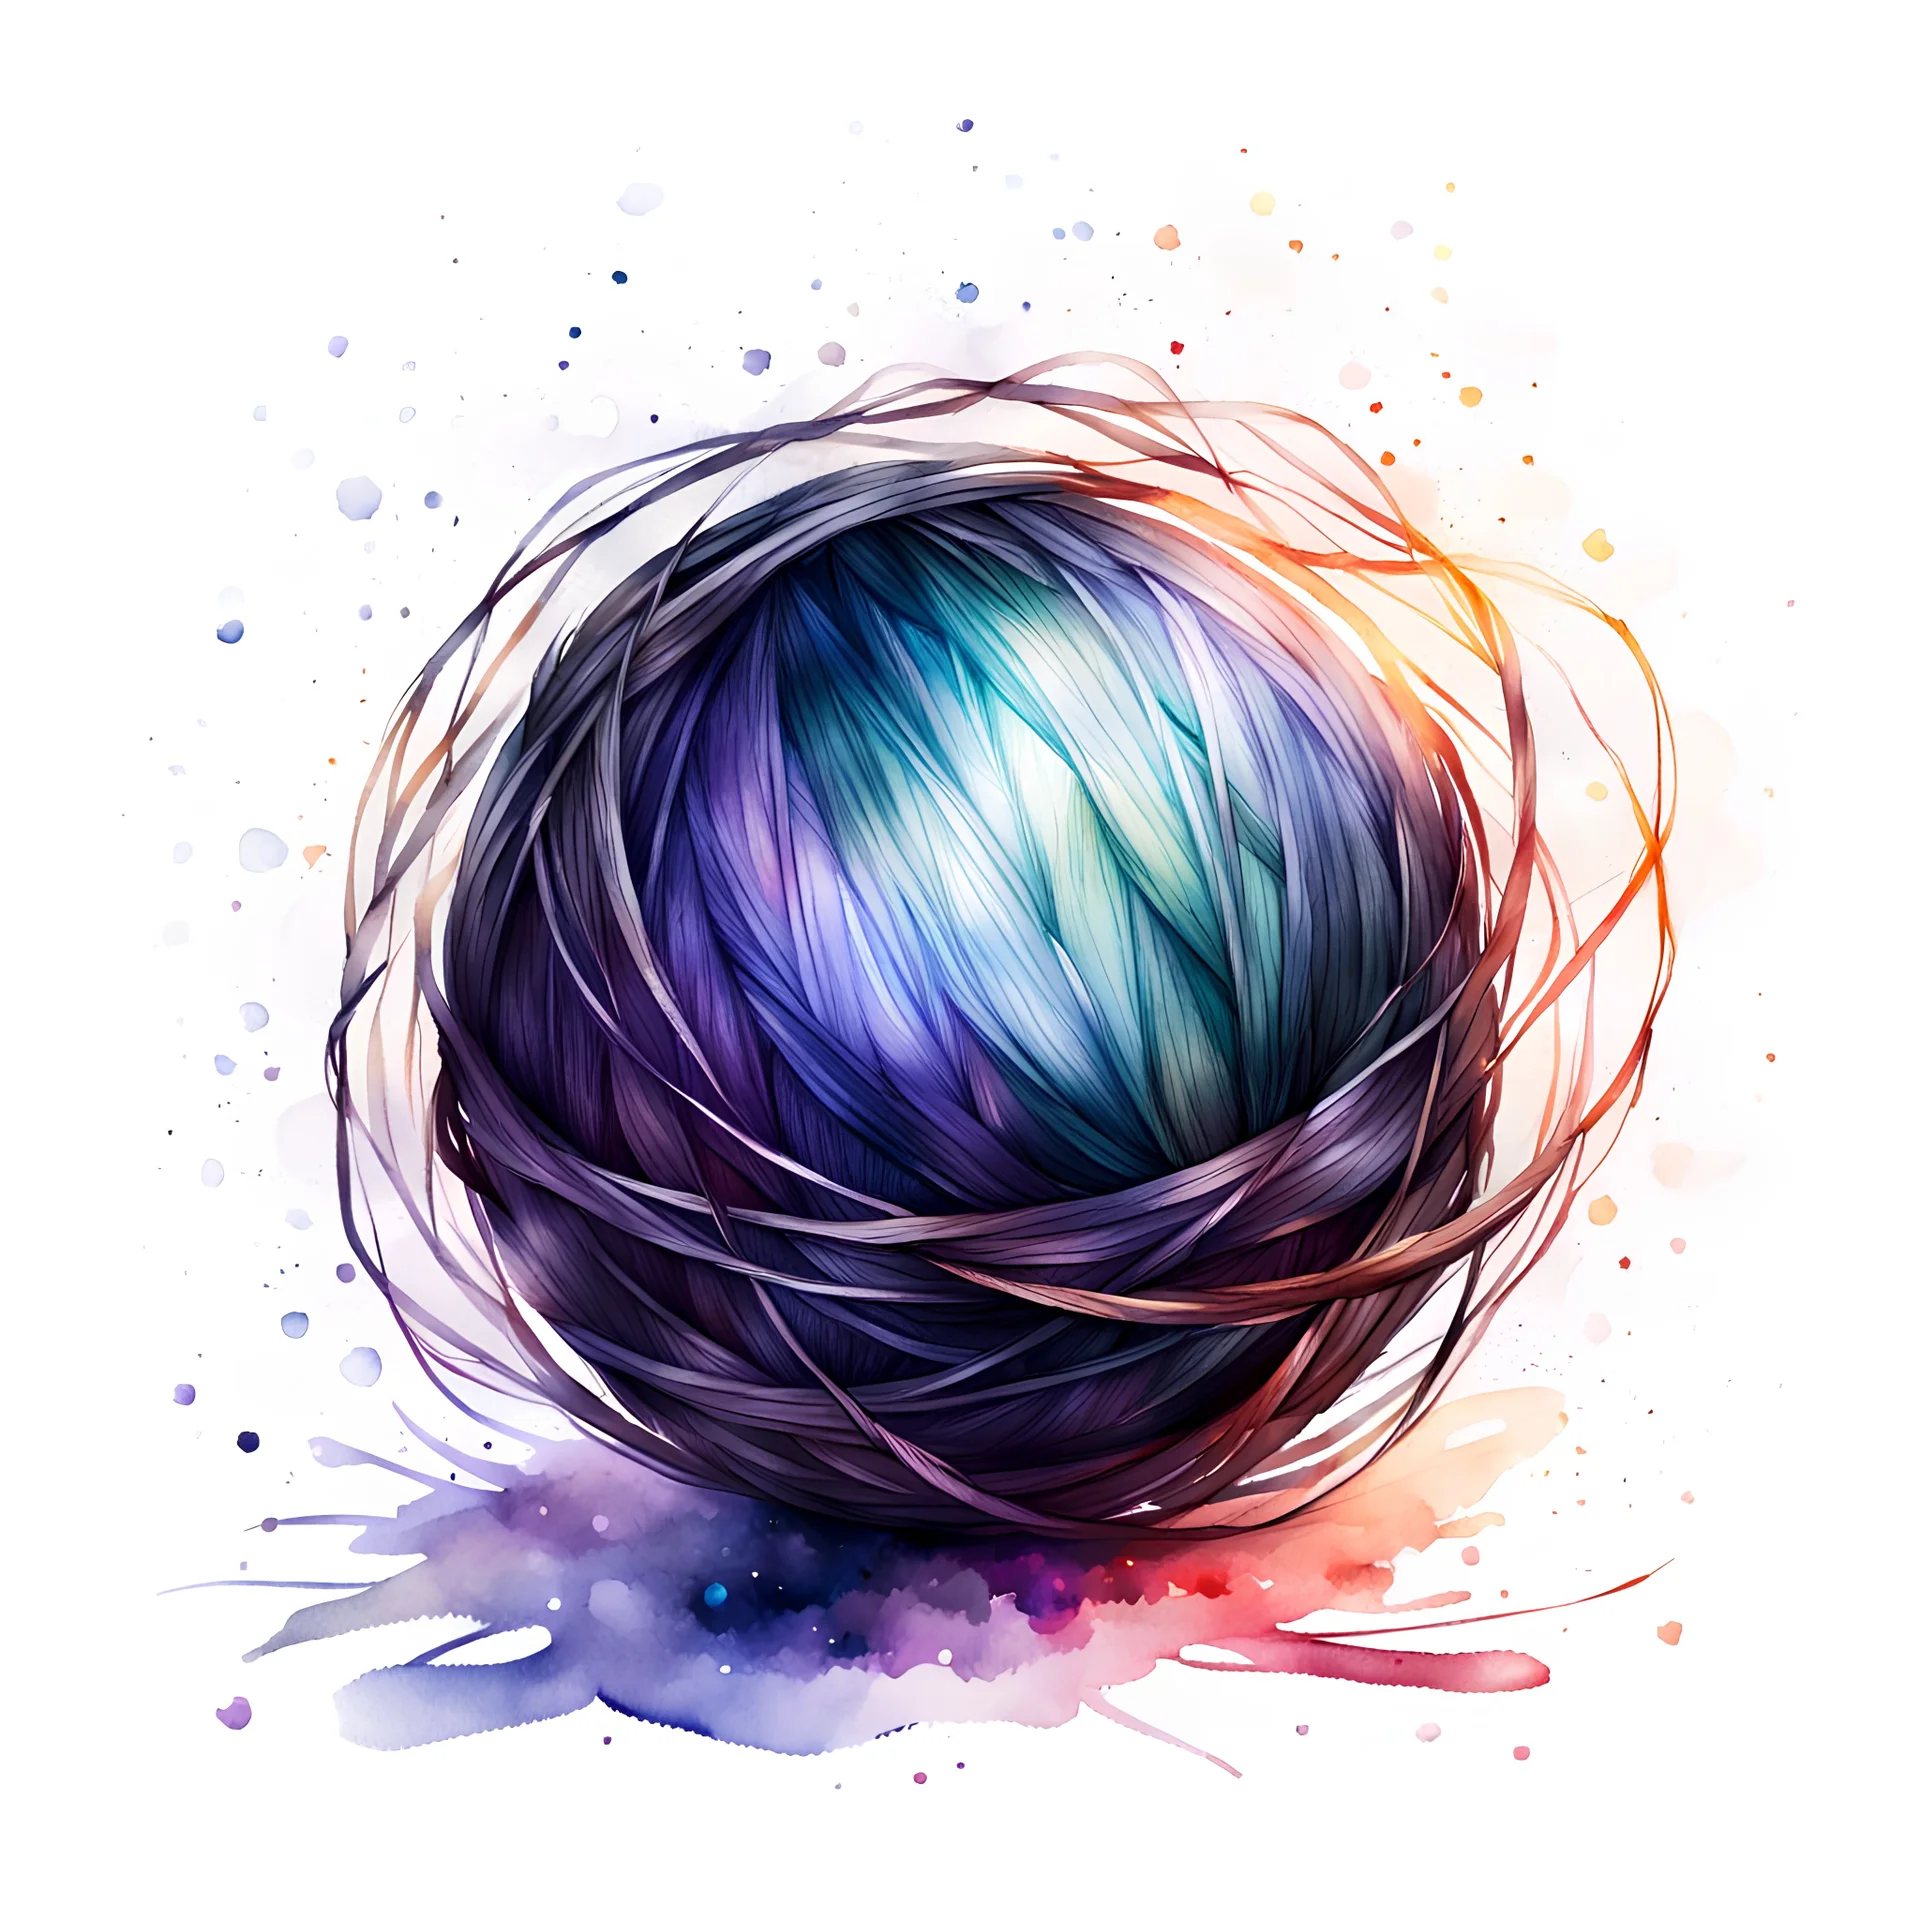 watercolor drawing of Slavic magic ball of thread on a white background, Trending on Artstation, {creative commons}, fanart, AIart, {Woolitize}, by Charlie Bowater, Illustration, Color Grading, Filmic, Nikon D750, Brenizer Method, Perspective, Depth of Field, Field of View, F/2.8, Lens Flare, Tonal Colors, 8K, Full-HD, ProPhoto RGB, Perfectionism, Rim Lighting, Natural Lighting, Soft Lighting, Acc